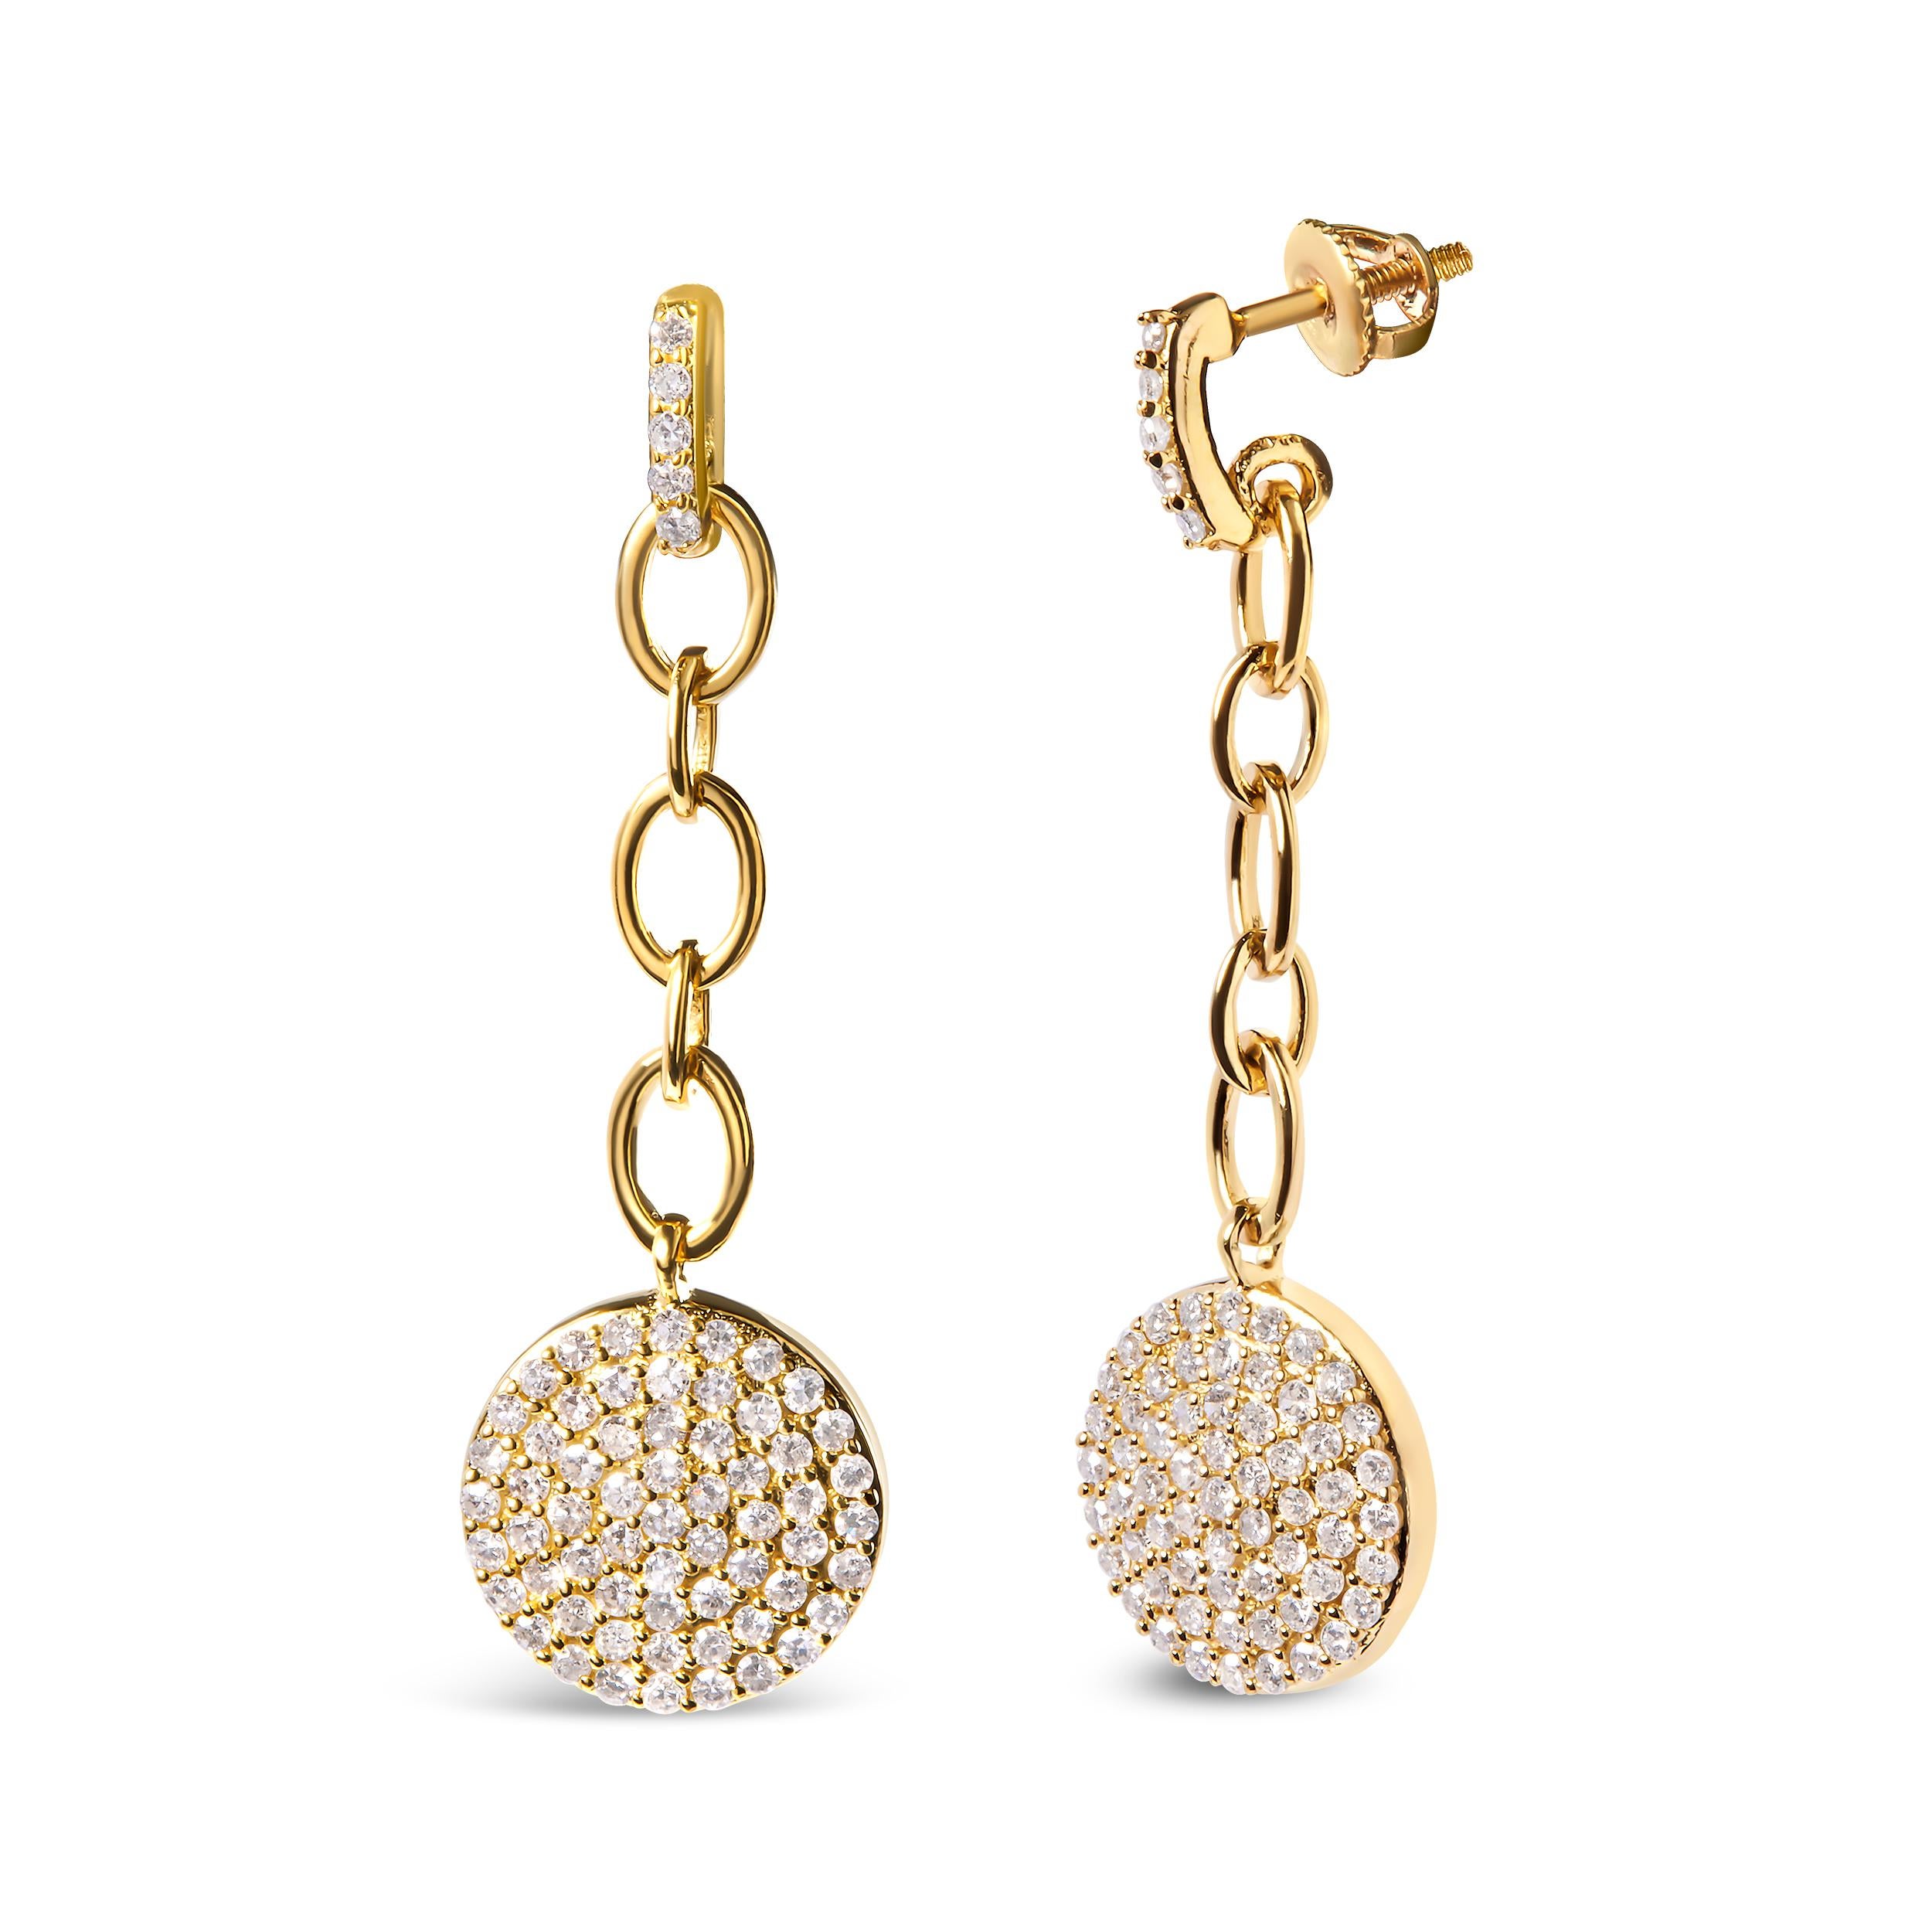 Dazzle and delight with these stunning diamond chain dangle earrings, crafted from 18K yellow gold plated .925 sterling silver. The 132 round diamonds that make up the 1.0 cttw composite cluster radiate a brilliant sparkle, thanks to their